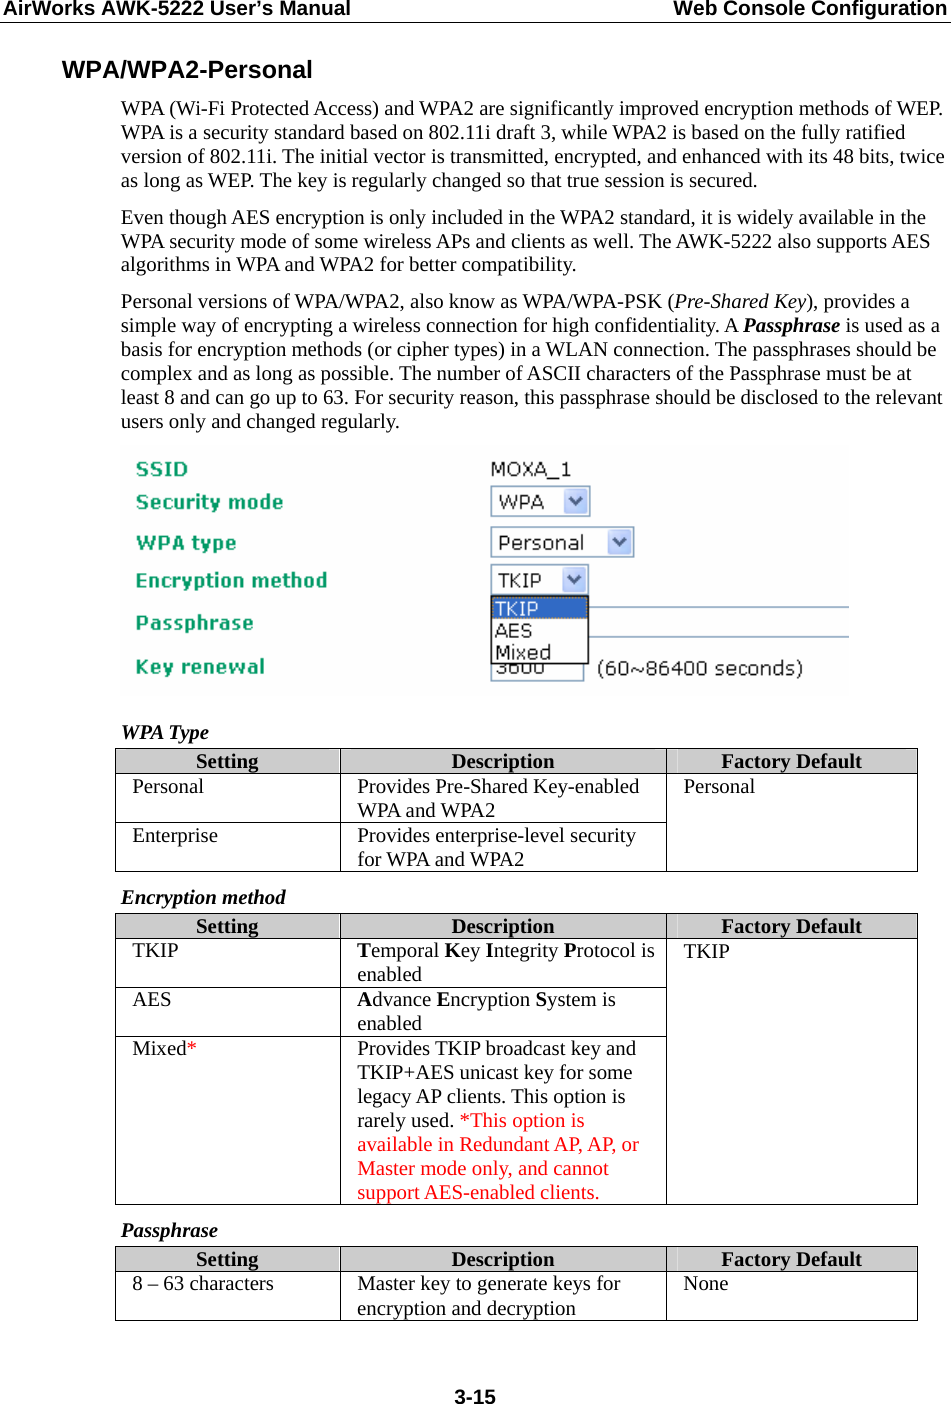 AirWorks AWK-5222 User’s Manual  Web Console Configuration  3-15WPA/WPA2-Personal WPA (Wi-Fi Protected Access) and WPA2 are significantly improved encryption methods of WEP. WPA is a security standard based on 802.11i draft 3, while WPA2 is based on the fully ratified version of 802.11i. The initial vector is transmitted, encrypted, and enhanced with its 48 bits, twice as long as WEP. The key is regularly changed so that true session is secured. Even though AES encryption is only included in the WPA2 standard, it is widely available in the WPA security mode of some wireless APs and clients as well. The AWK-5222 also supports AES algorithms in WPA and WPA2 for better compatibility. Personal versions of WPA/WPA2, also know as WPA/WPA-PSK (Pre-Shared Key), provides a simple way of encrypting a wireless connection for high confidentiality. A Passphrase is used as a basis for encryption methods (or cipher types) in a WLAN connection. The passphrases should be complex and as long as possible. The number of ASCII characters of the Passphrase must be at least 8 and can go up to 63. For security reason, this passphrase should be disclosed to the relevant users only and changed regularly.  WPA Type Setting  Description  Factory Default Personal Provides Pre-Shared Key-enabled WPA and WPA2 Enterprise  Provides enterprise-level security for WPA and WPA2 Personal Encryption method Setting  Description  Factory Default TKIP  Temporal Key Integrity Protocol is enabled AES  Advance Encryption System is enabled Mixed*  Provides TKIP broadcast key and TKIP+AES unicast key for some legacy AP clients. This option is rarely used. *This option is available in Redundant AP, AP, or Master mode only, and cannot support AES-enabled clients. TKIP Passphrase Setting  Description  Factory Default 8 – 63 characters  Master key to generate keys for encryption and decryption  None 